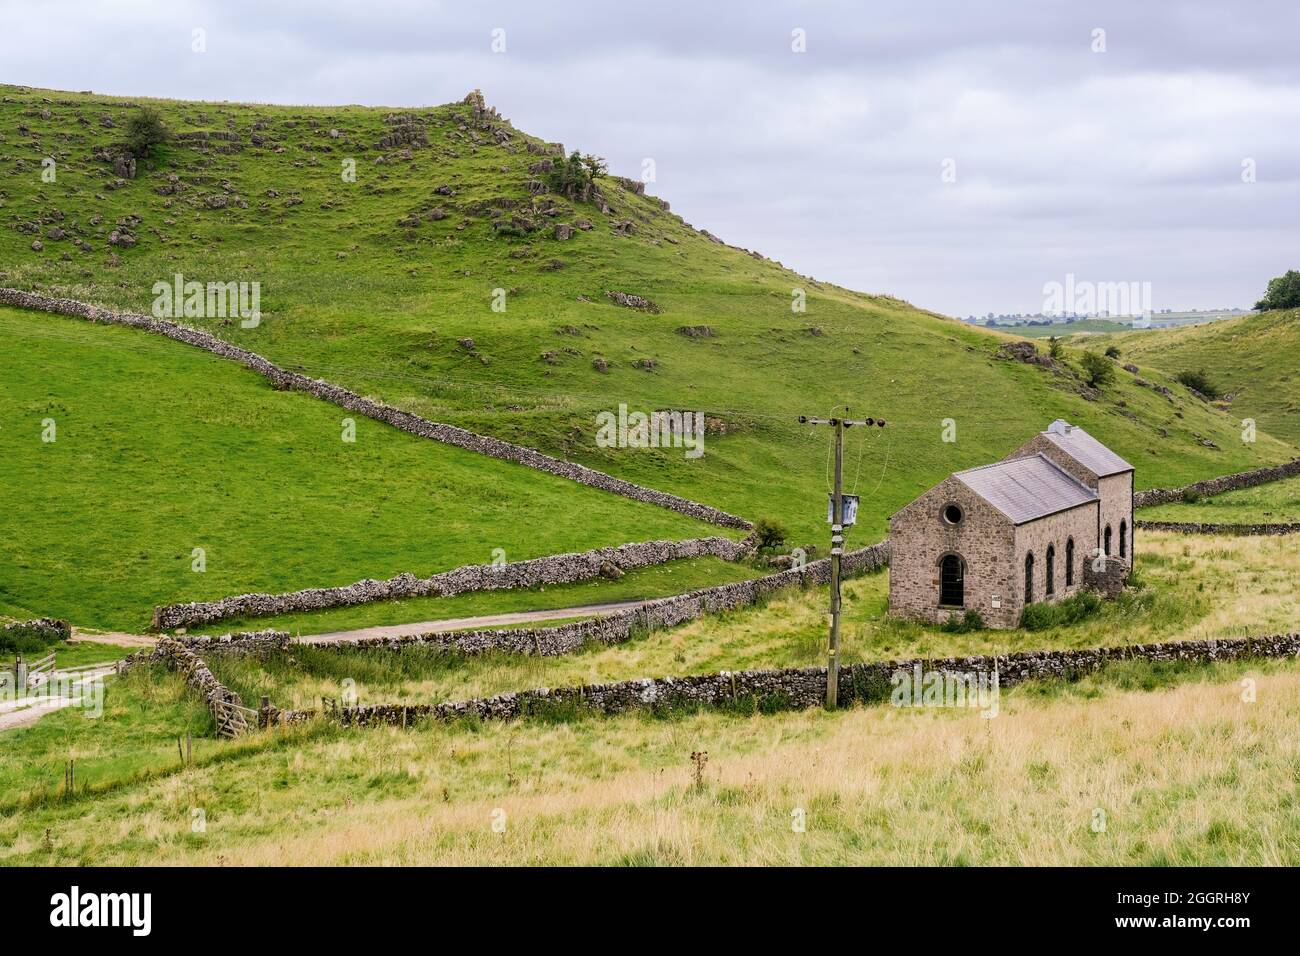 A distant view of Roystone Grange Pump House, a 19th century building which pumped compressed air to drive drills in the local quarries. Limestone wal Stock Photo